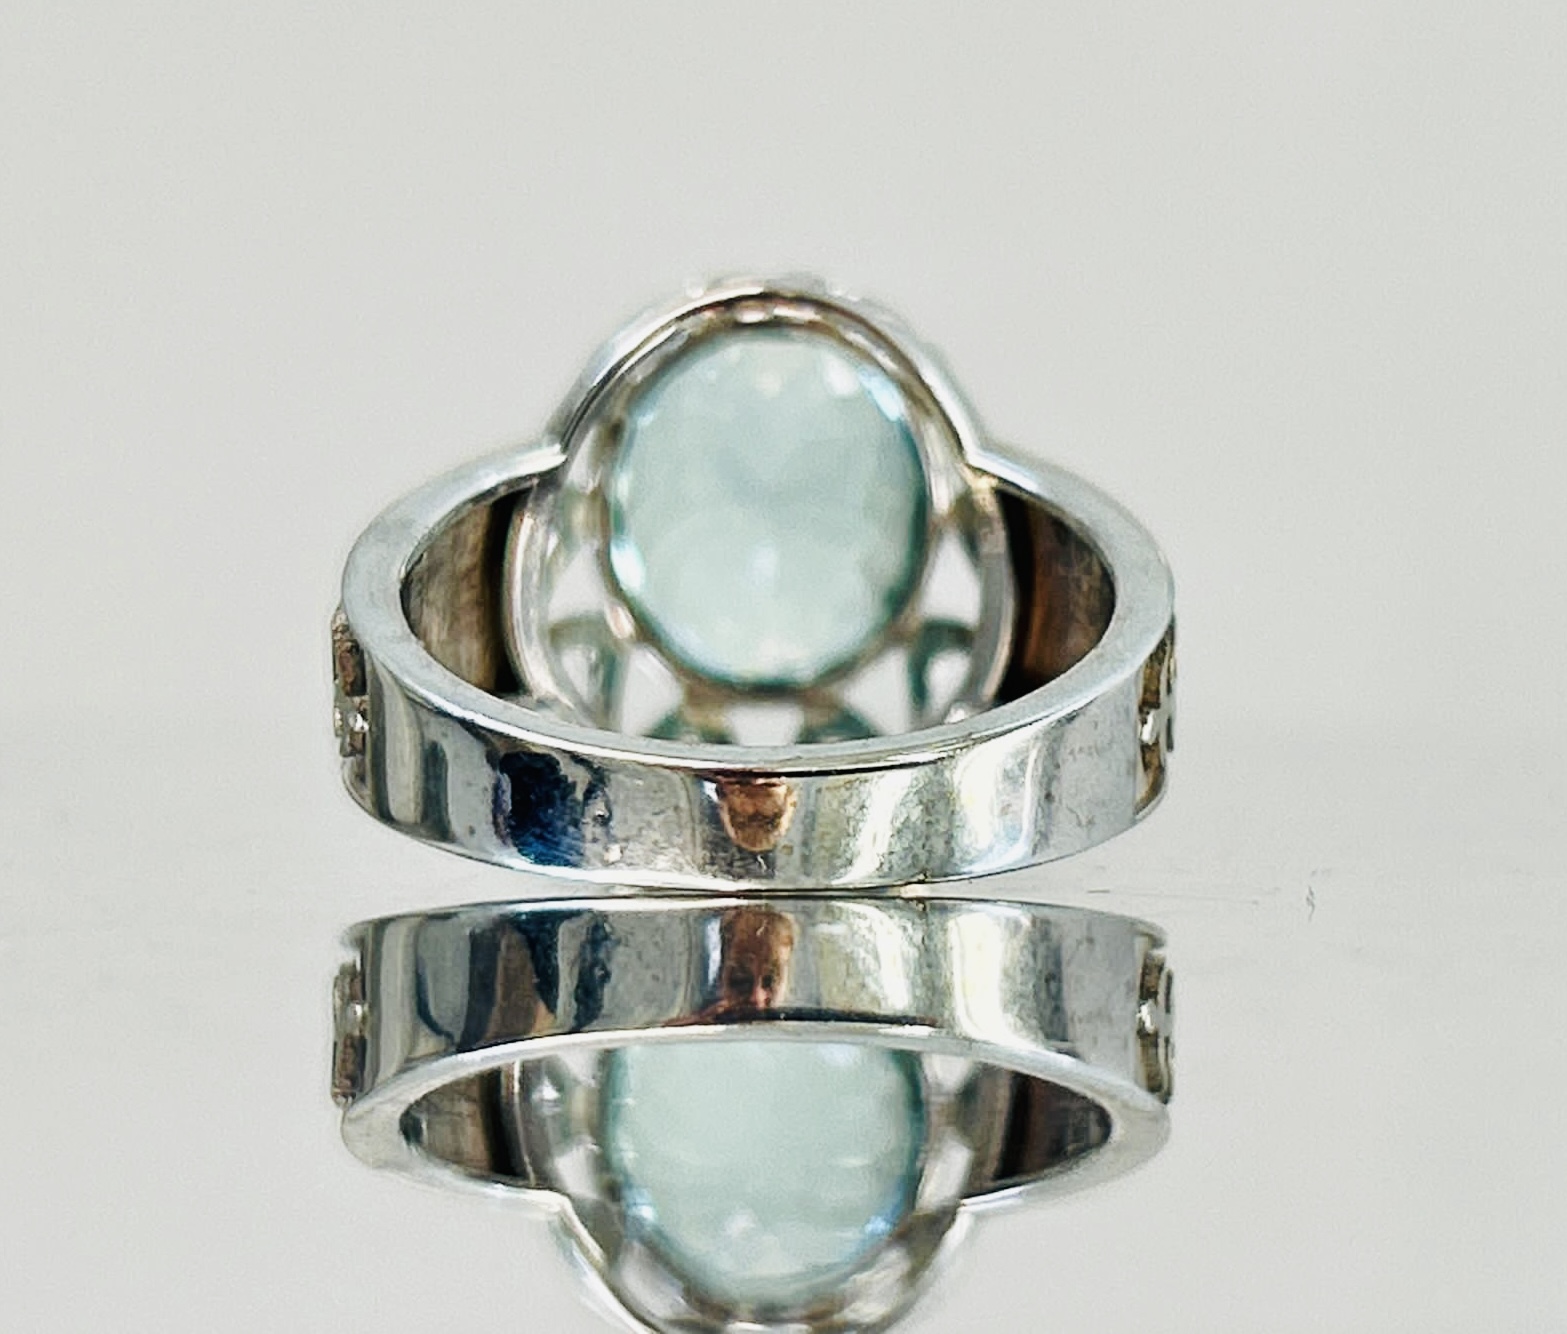 Beautiful Natural Flawless 4.58 CT Aquamarine Ring With Diamonds and 18k Gold - Image 5 of 5